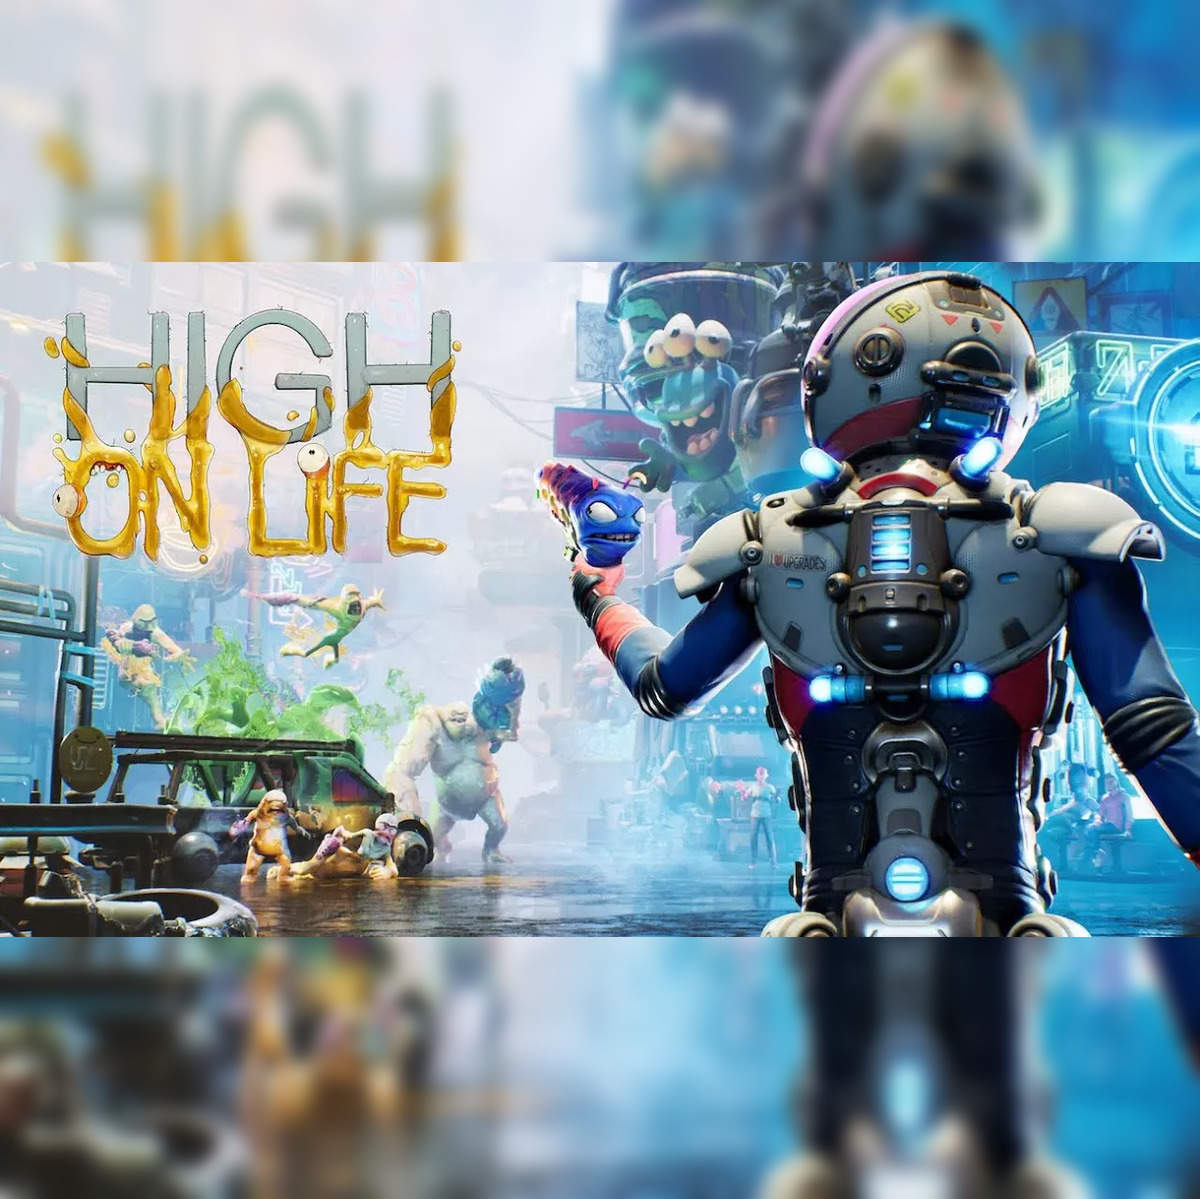 High on Life now available on PS4, PS5 along with PC, Steam, Xbox. Know how  to buy, pricing details - The Economic Times